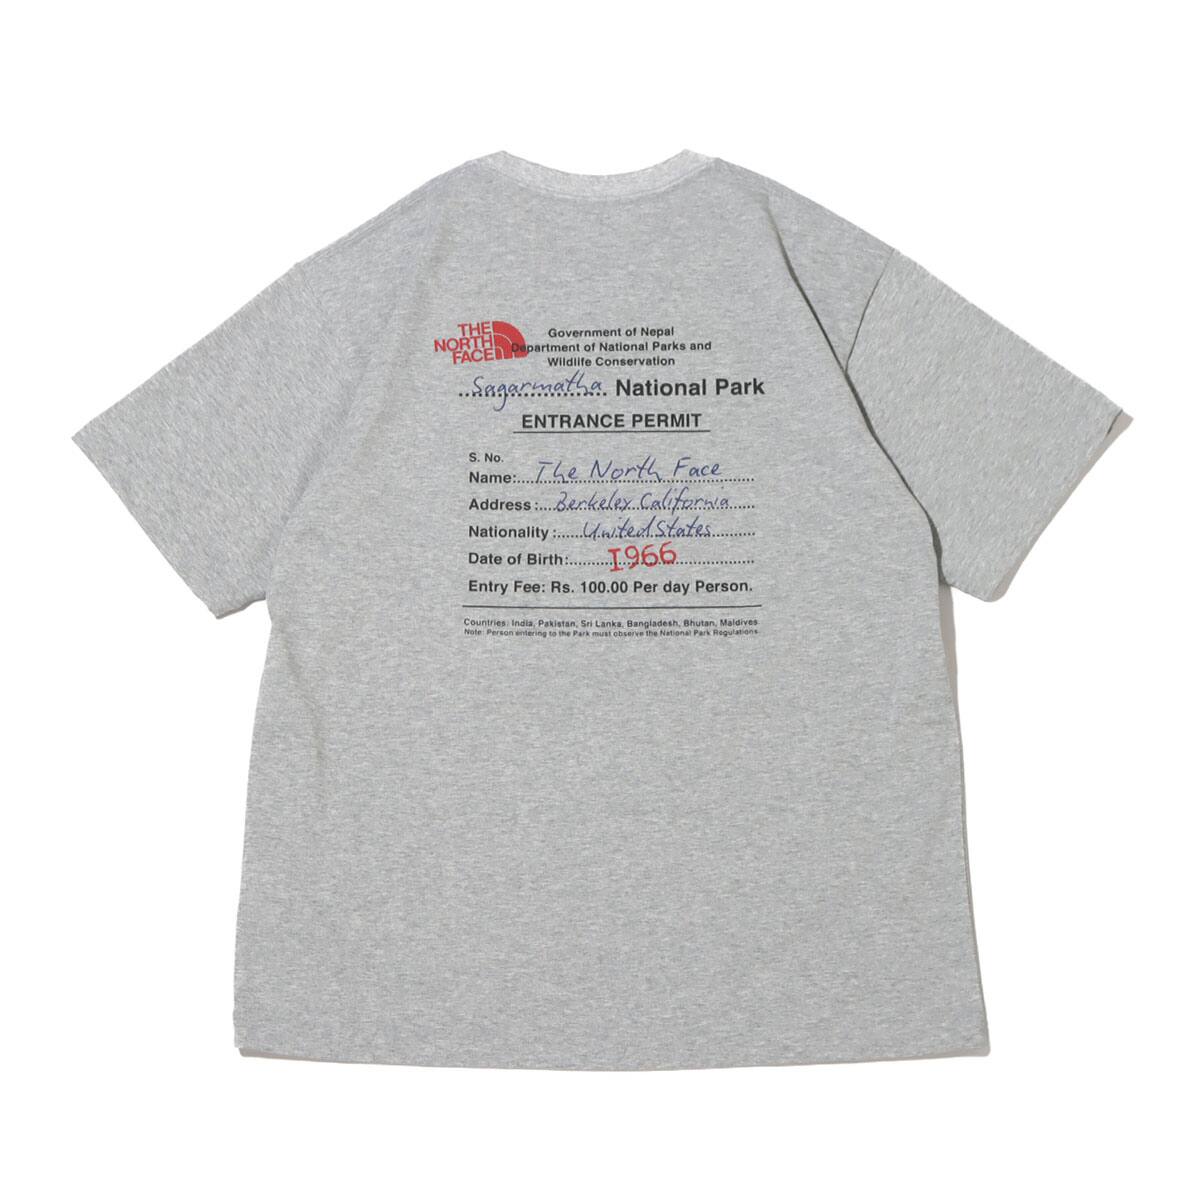 THE NORTH FACE S/S ENTRANCE PERMISSION TEE ミックスグレー 23SS-I_photo_large